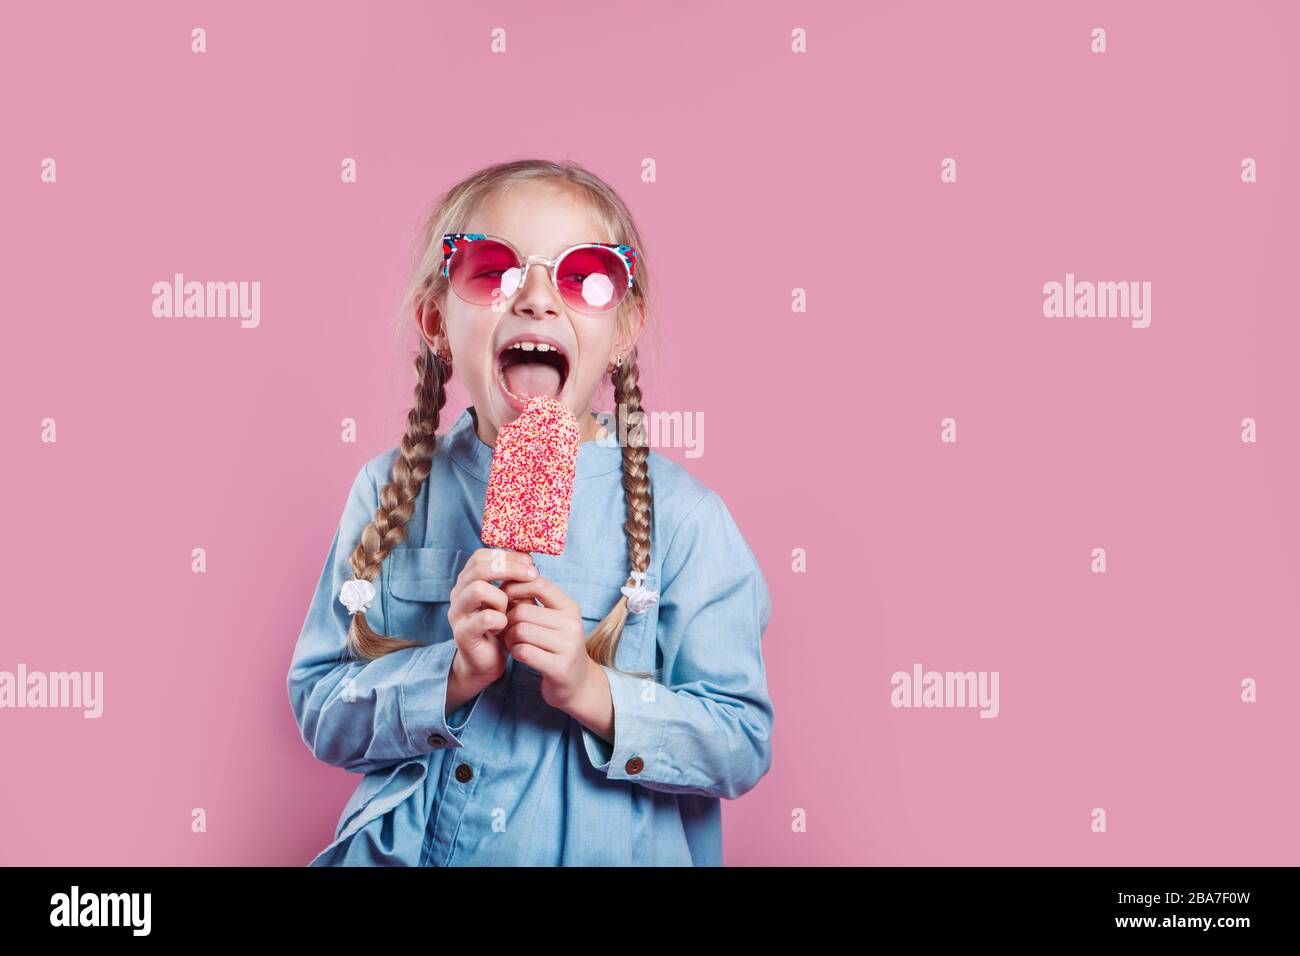 little cheerful girl in sunglasses with ice cream on pink background Stock Photo